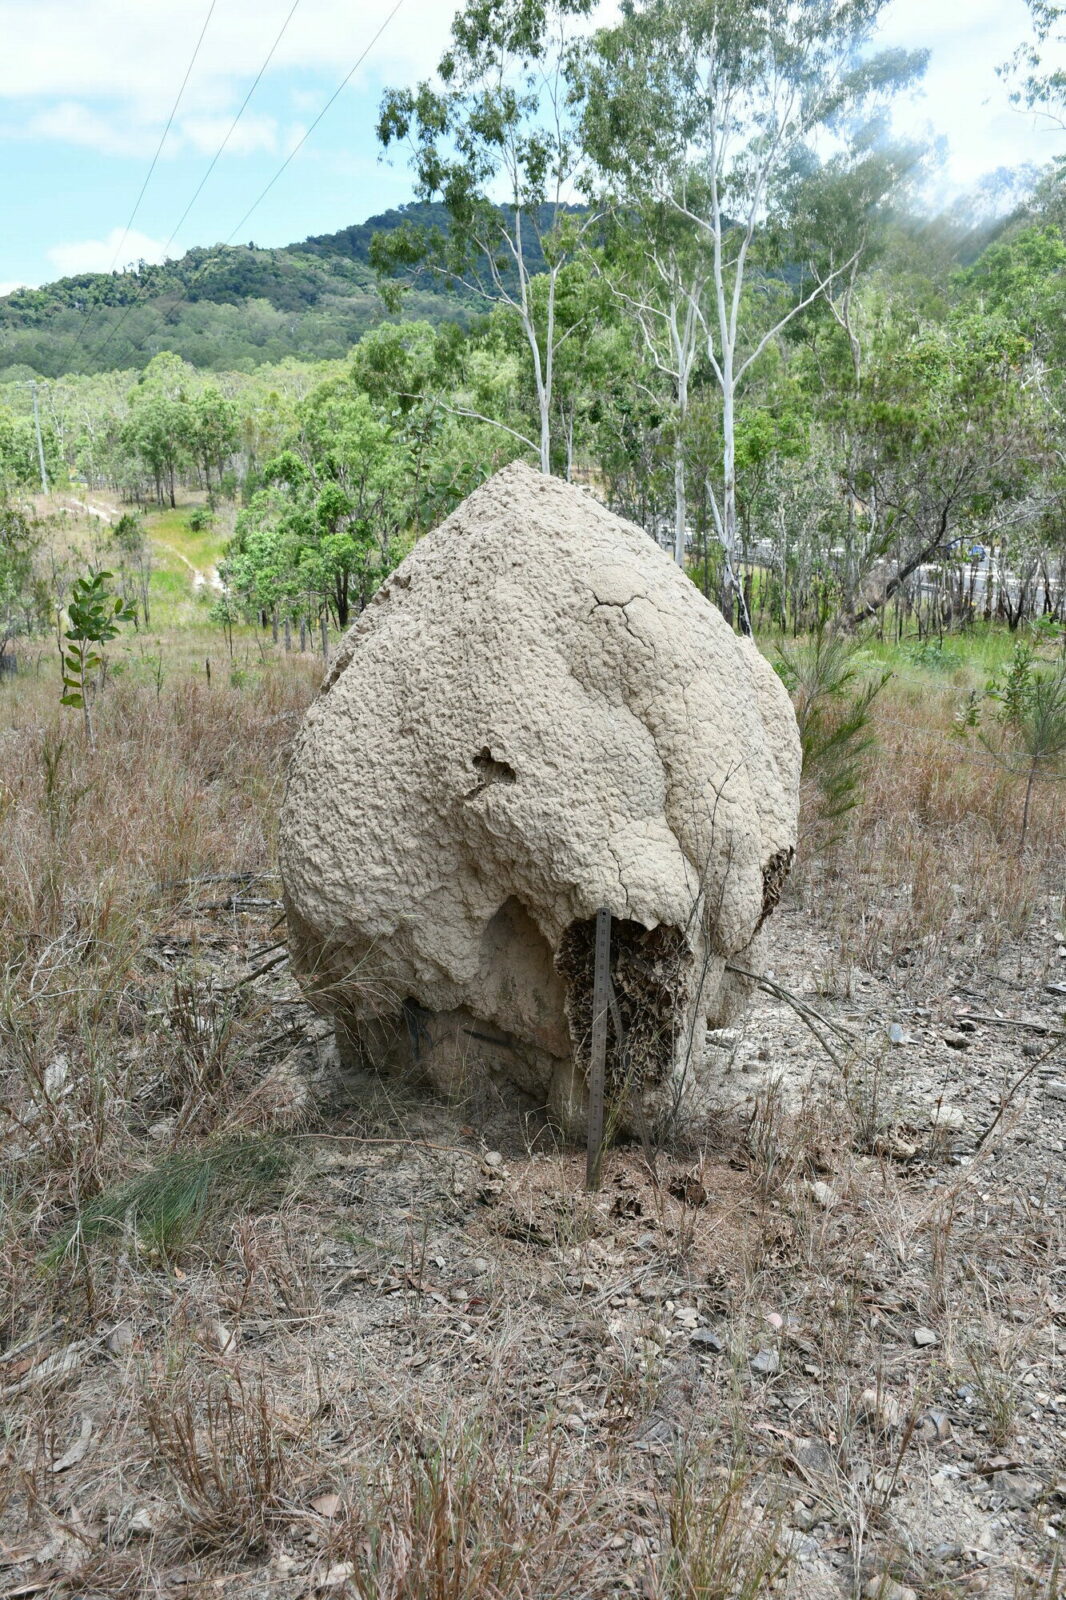 A termite mound, most likely built by the species Nasutitermes magnus, Queensland, Australia. Mound M23. Photo Andrea Perna [CC BY-SA 3.0]